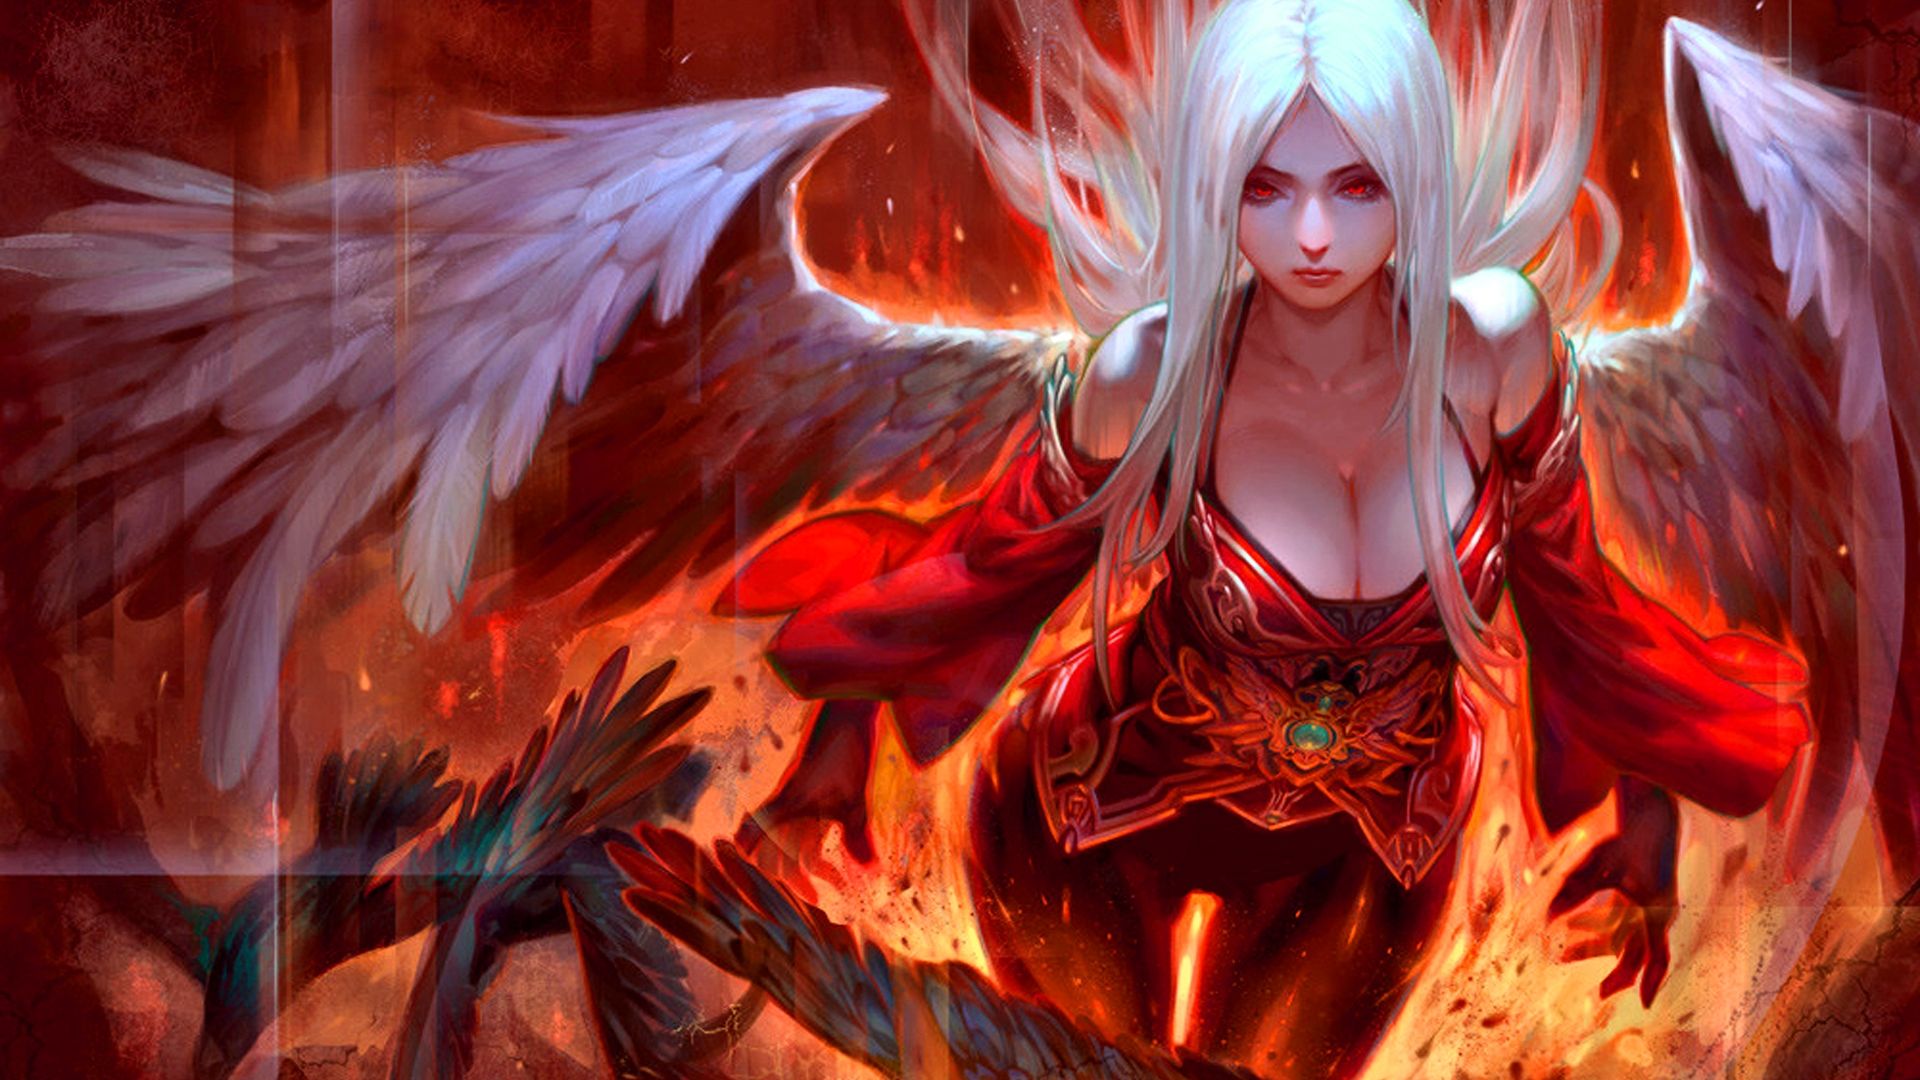 Free download League Of Angels Women Fantasy angel wallpaper and [1920x1200] for your Desktop, Mobile & Tablet. Explore League of Angels Wallpaper. League of Angels Wallpaper HD, Legend of Angels Wallpaper